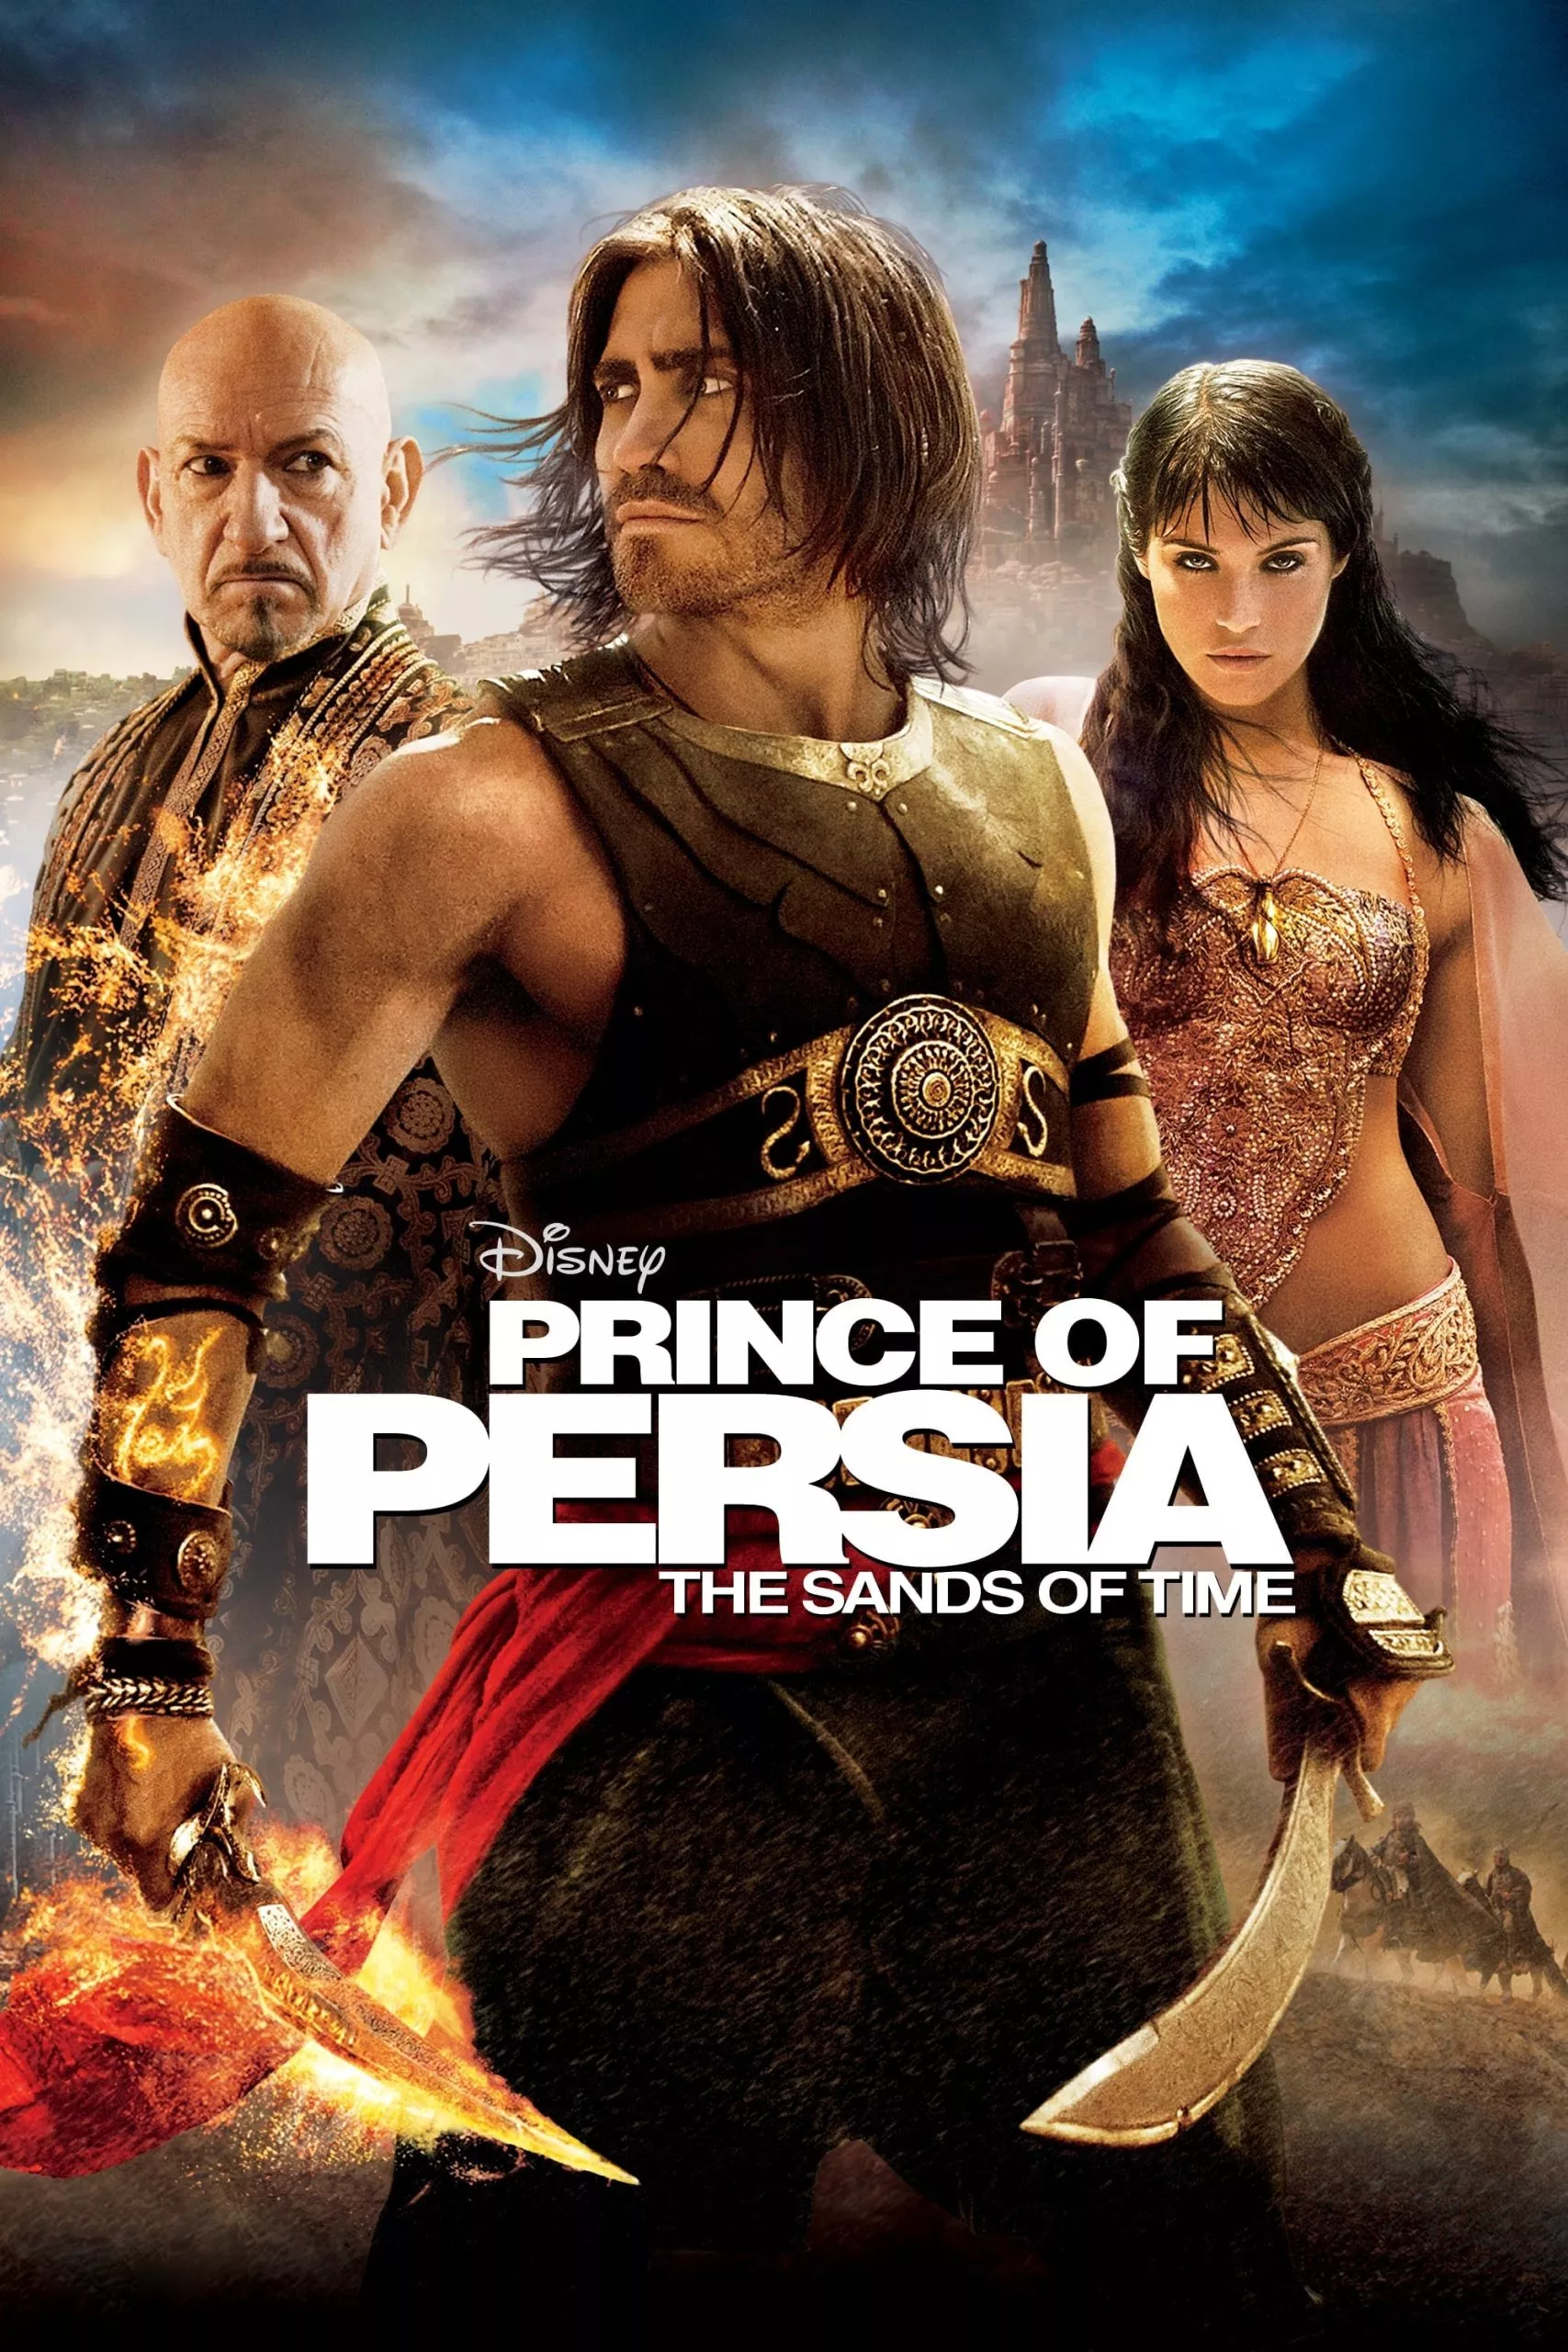 Prince Of Persia The Sands Of Time (2010) เจ้าชายแห่งเปอร์เซีย